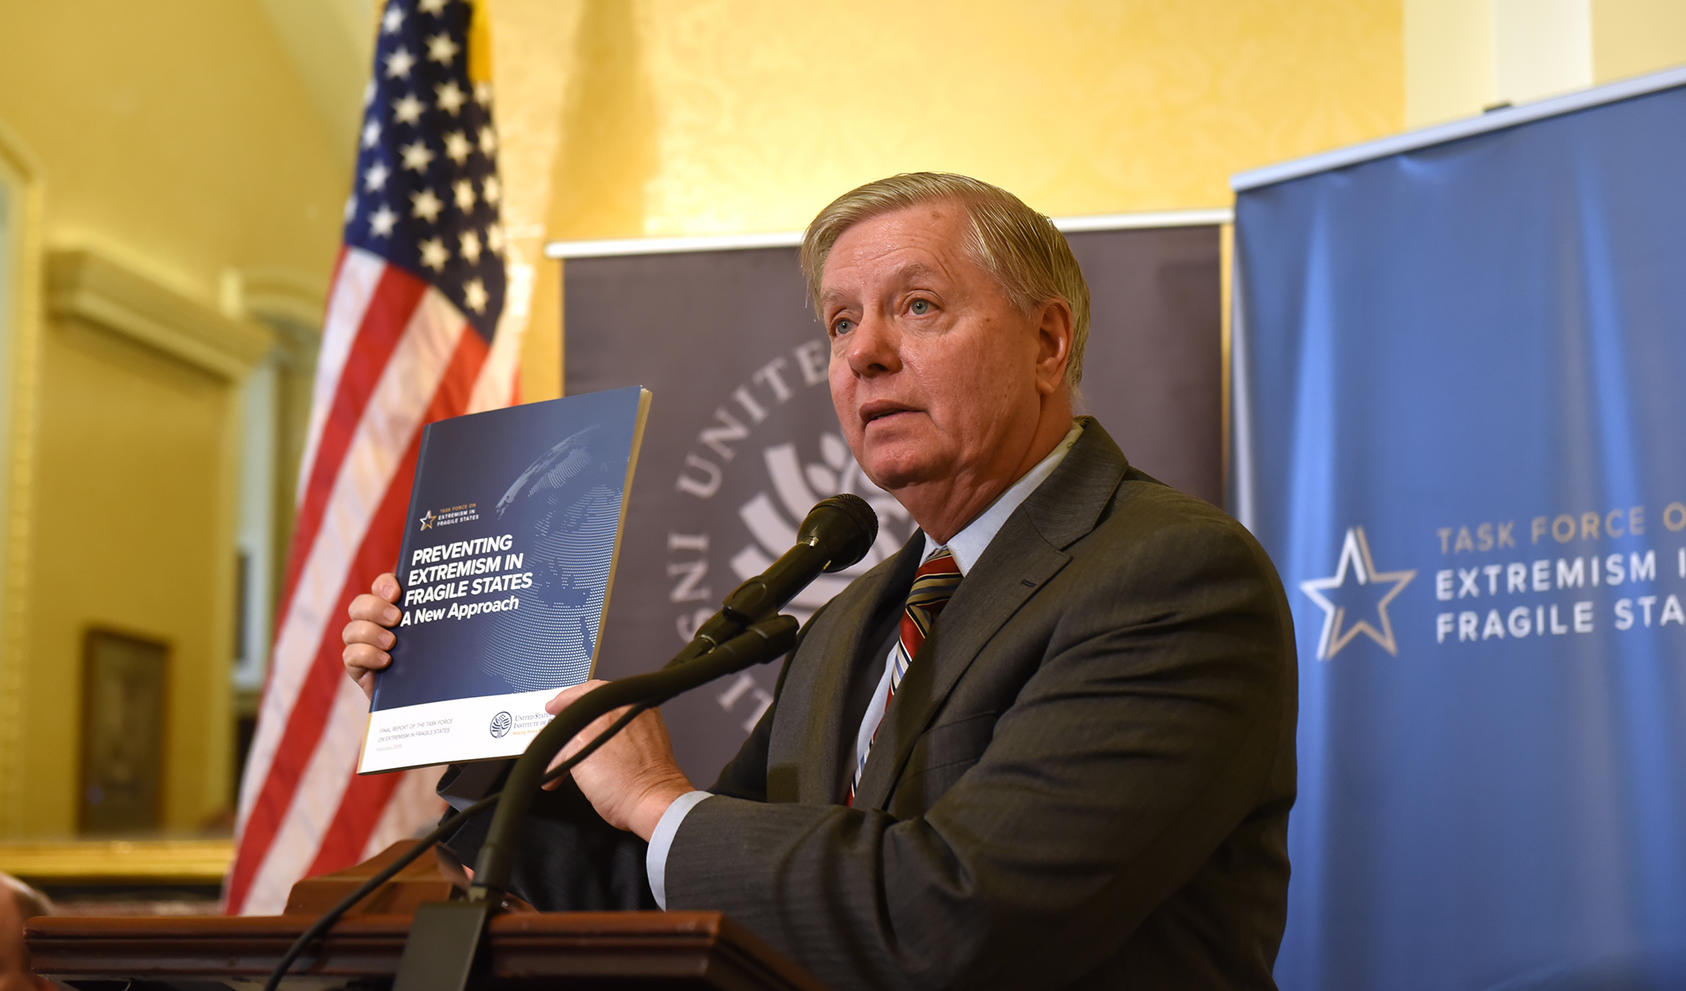 Senator Lindsey Graham (R-SC) addresses the audience at a press conference announcing the launch of the final report from Task Force on Extremism in Fragile States, February 26, 2019.